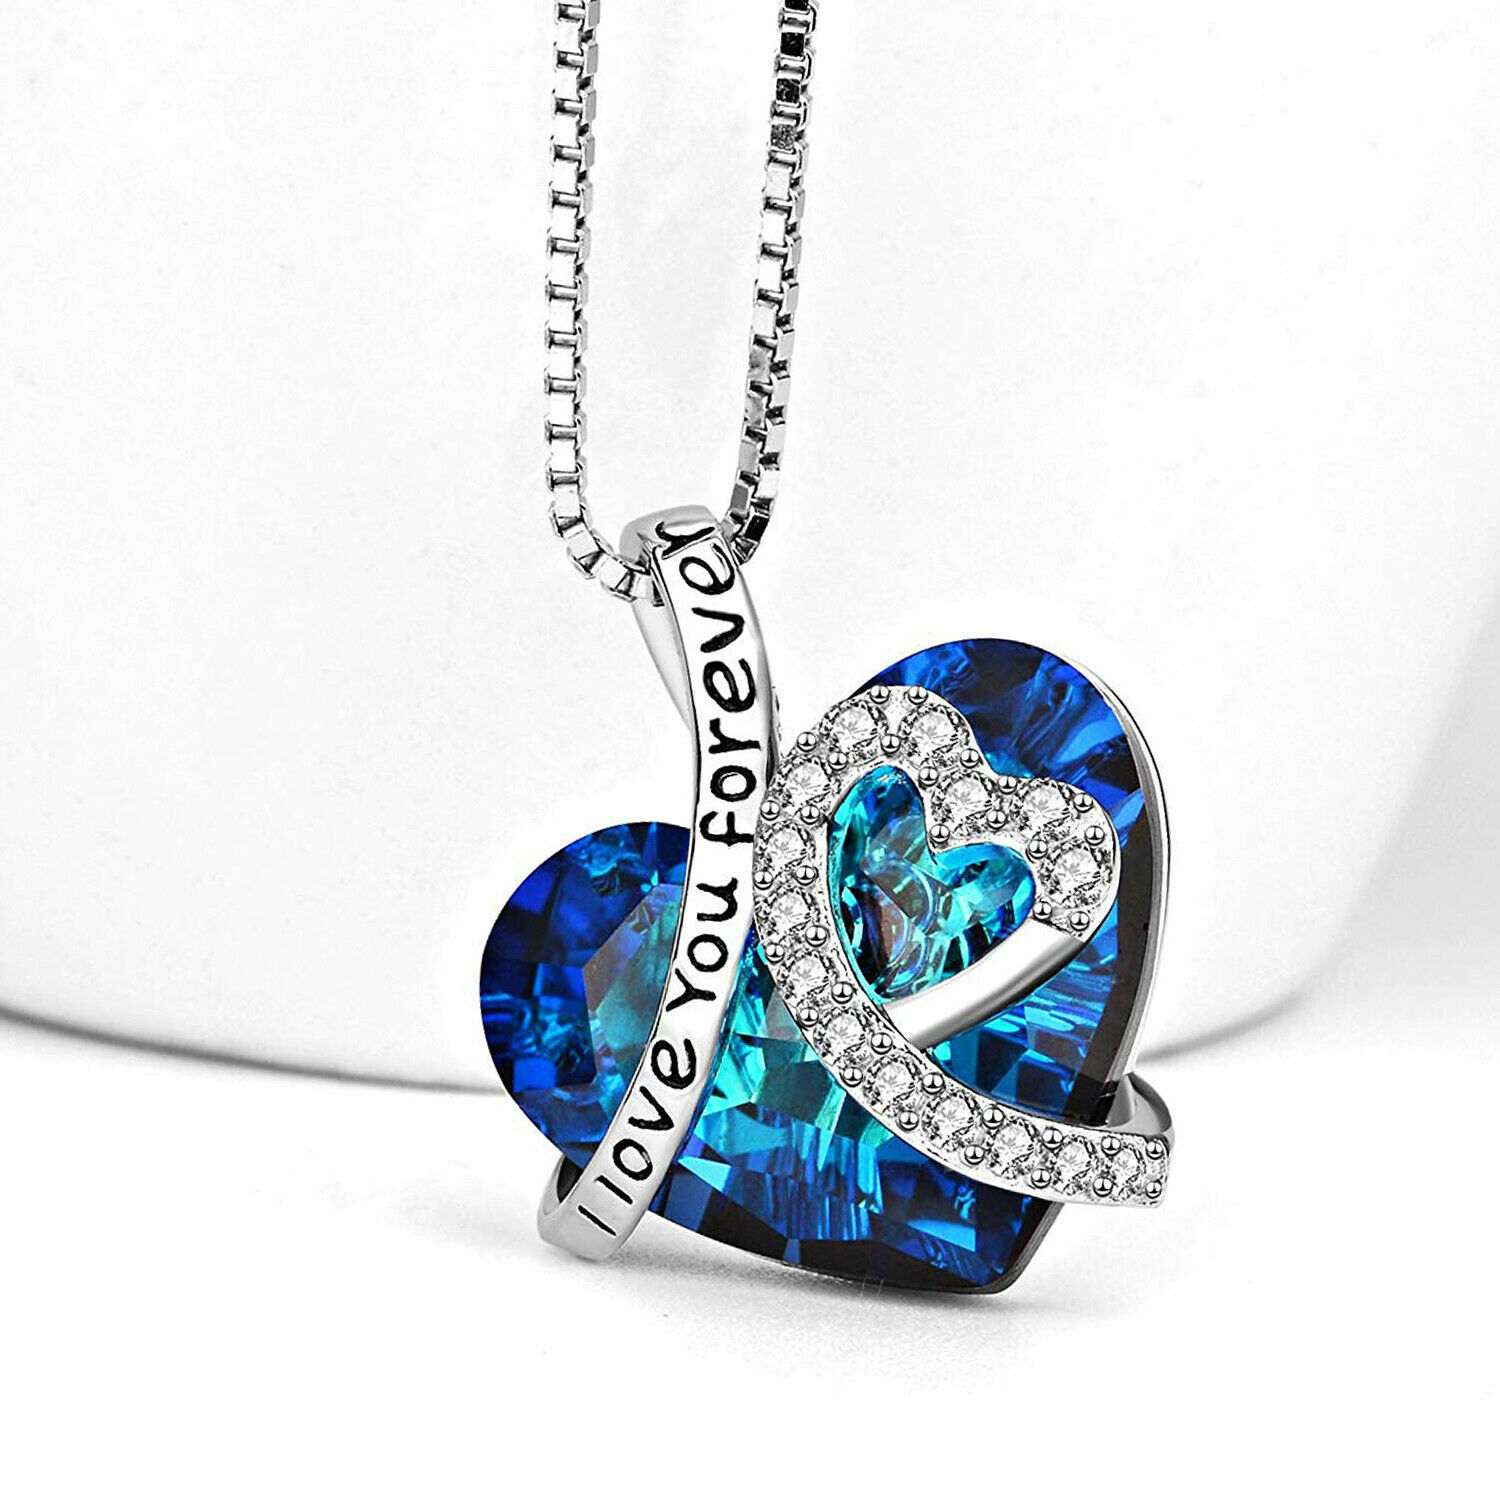 Blue Crystal Heart Pendant NecklaceI Love You Forever with Rhinestone Crystals